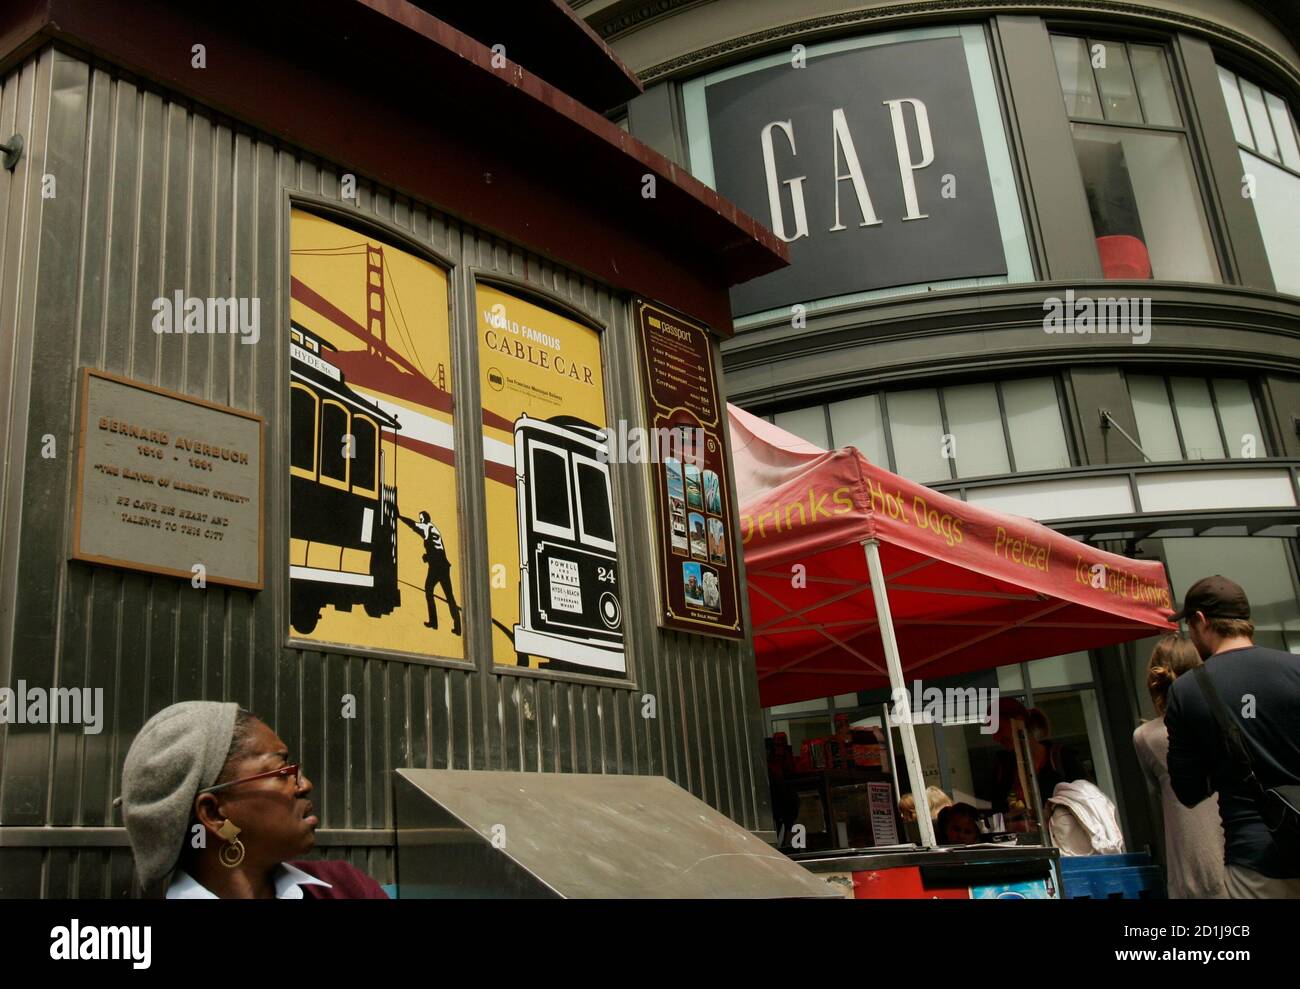 A Gap Inc. clothing store is shown at the Cable Car turn in San Francisco,  California August 21, 2008. Gap Inc said on Thursday that quarterly net  profit rose, helped by higher